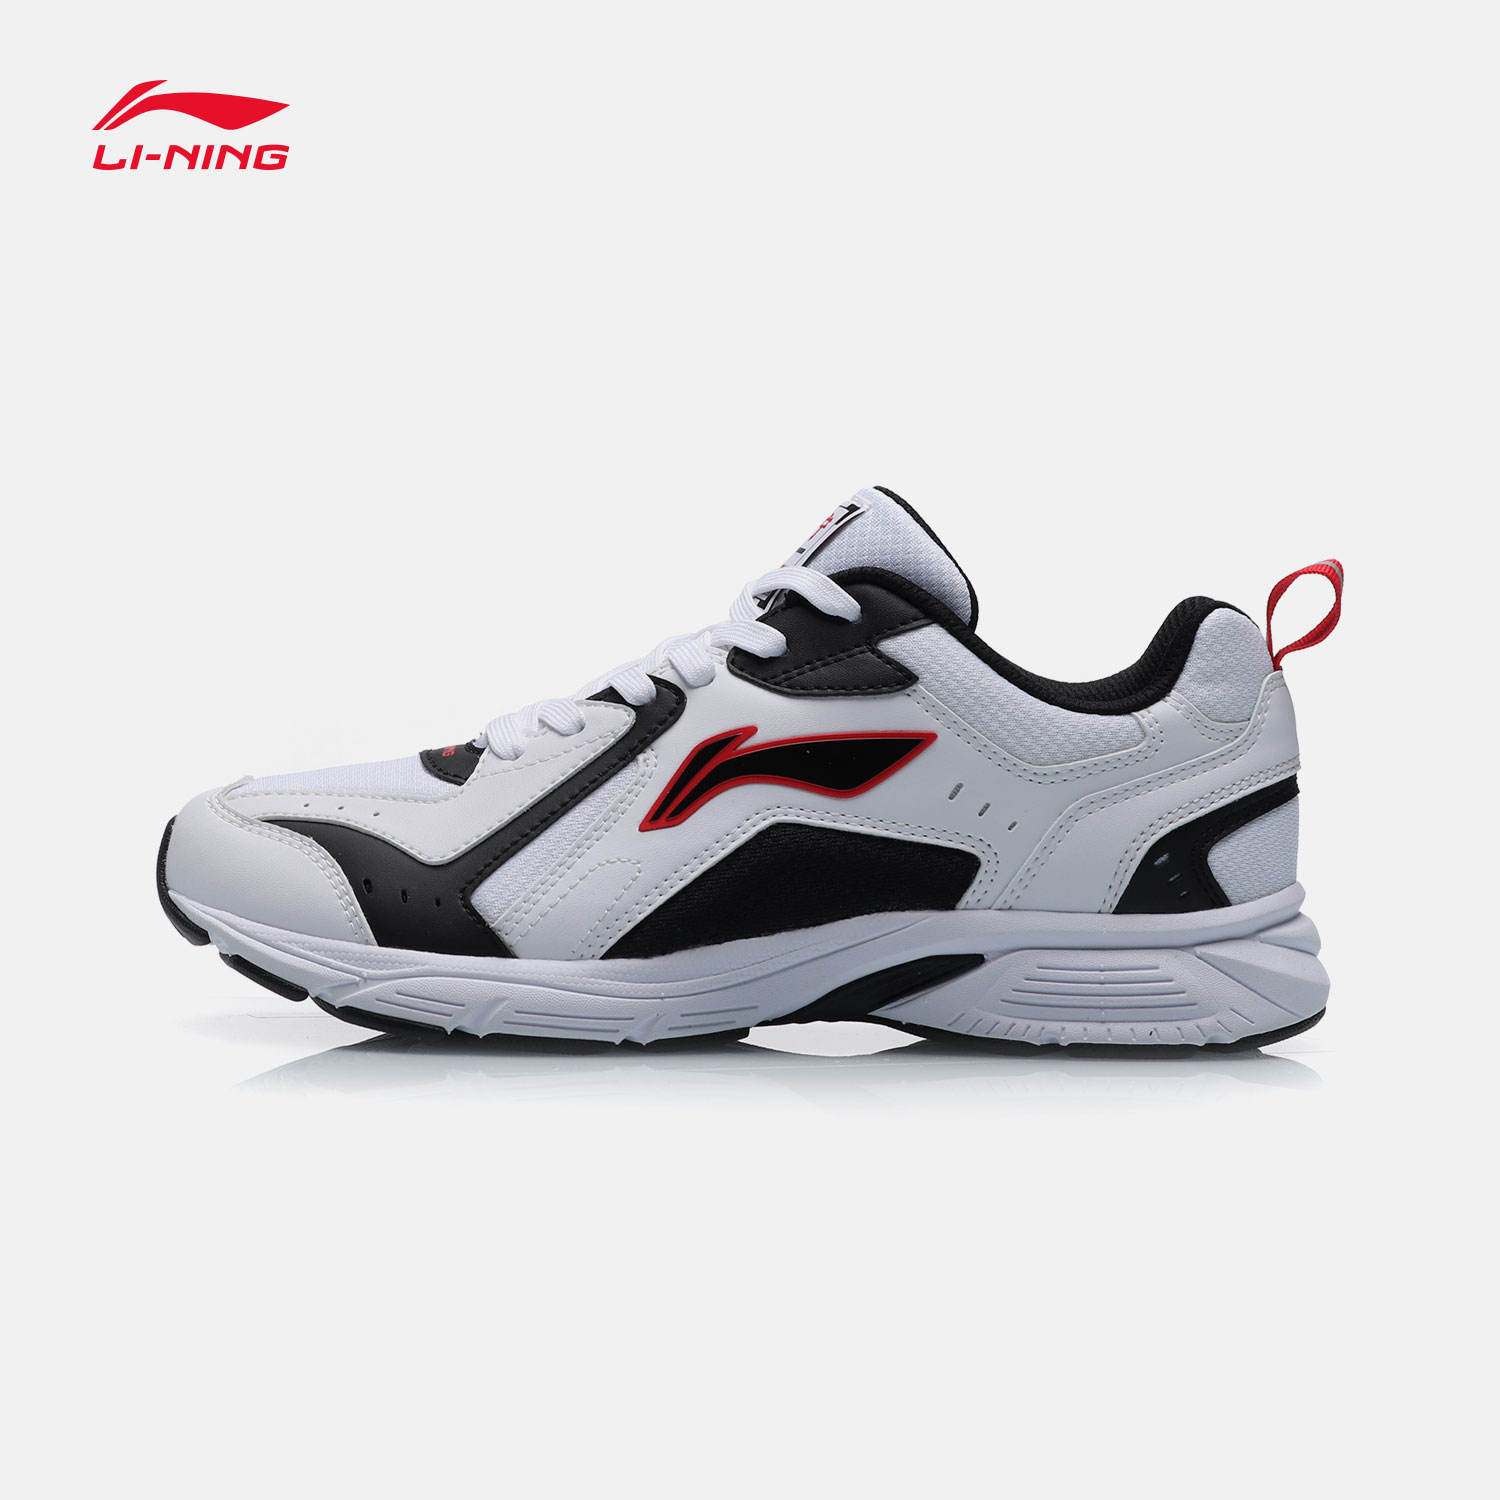 Li Ning Running Shoes Black and White Men's Shoe Brand Casual Shoes Sports Shoes Men's Wave Shoes Adult Pure Black Spring 2019 Men's